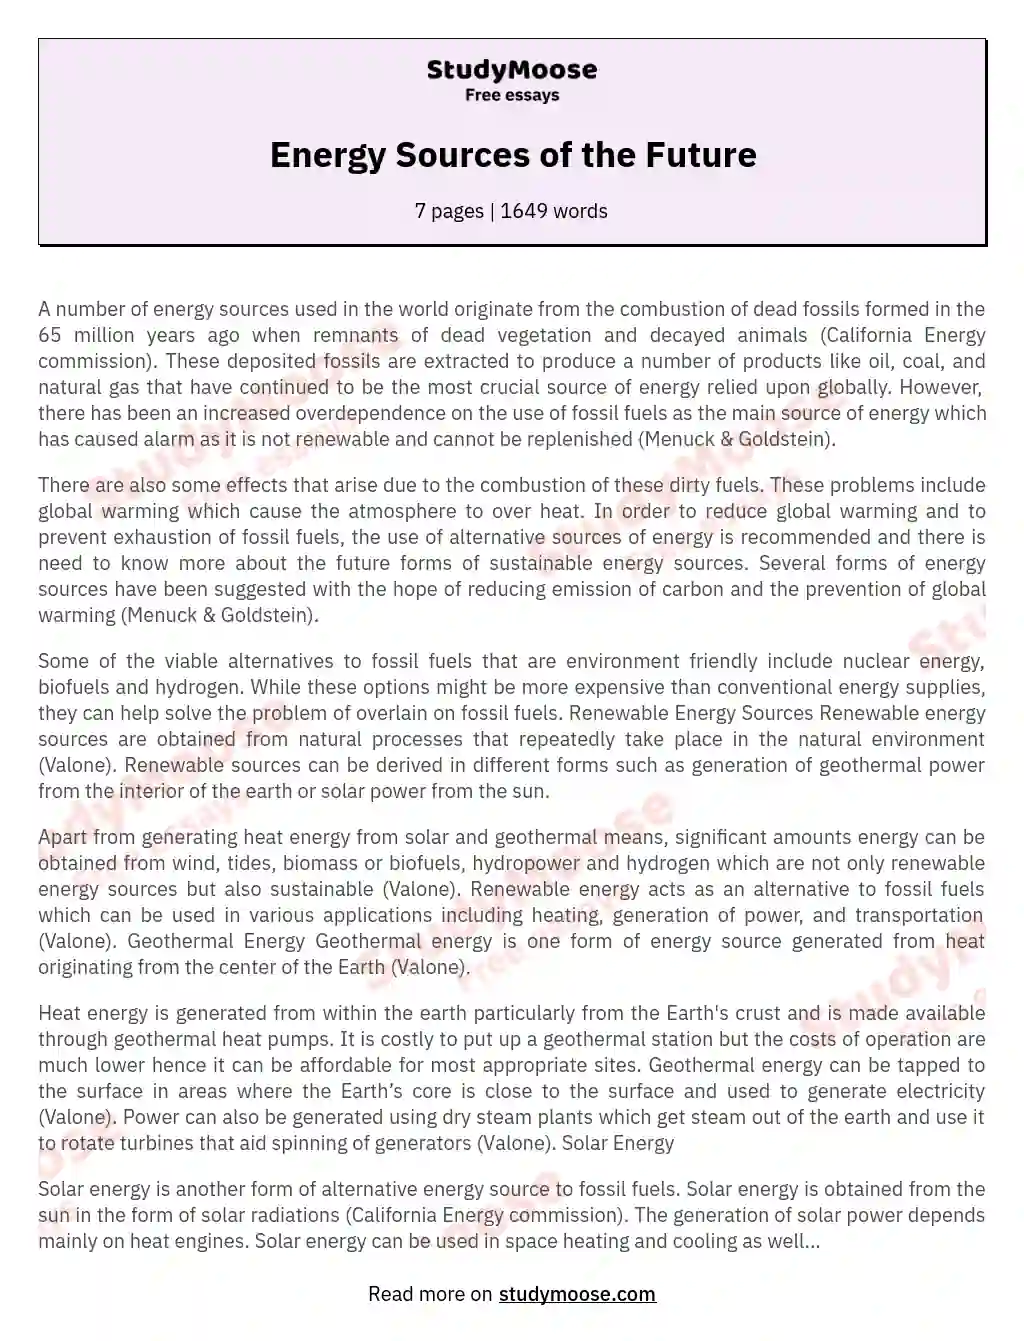 Energy Sources of the Future essay